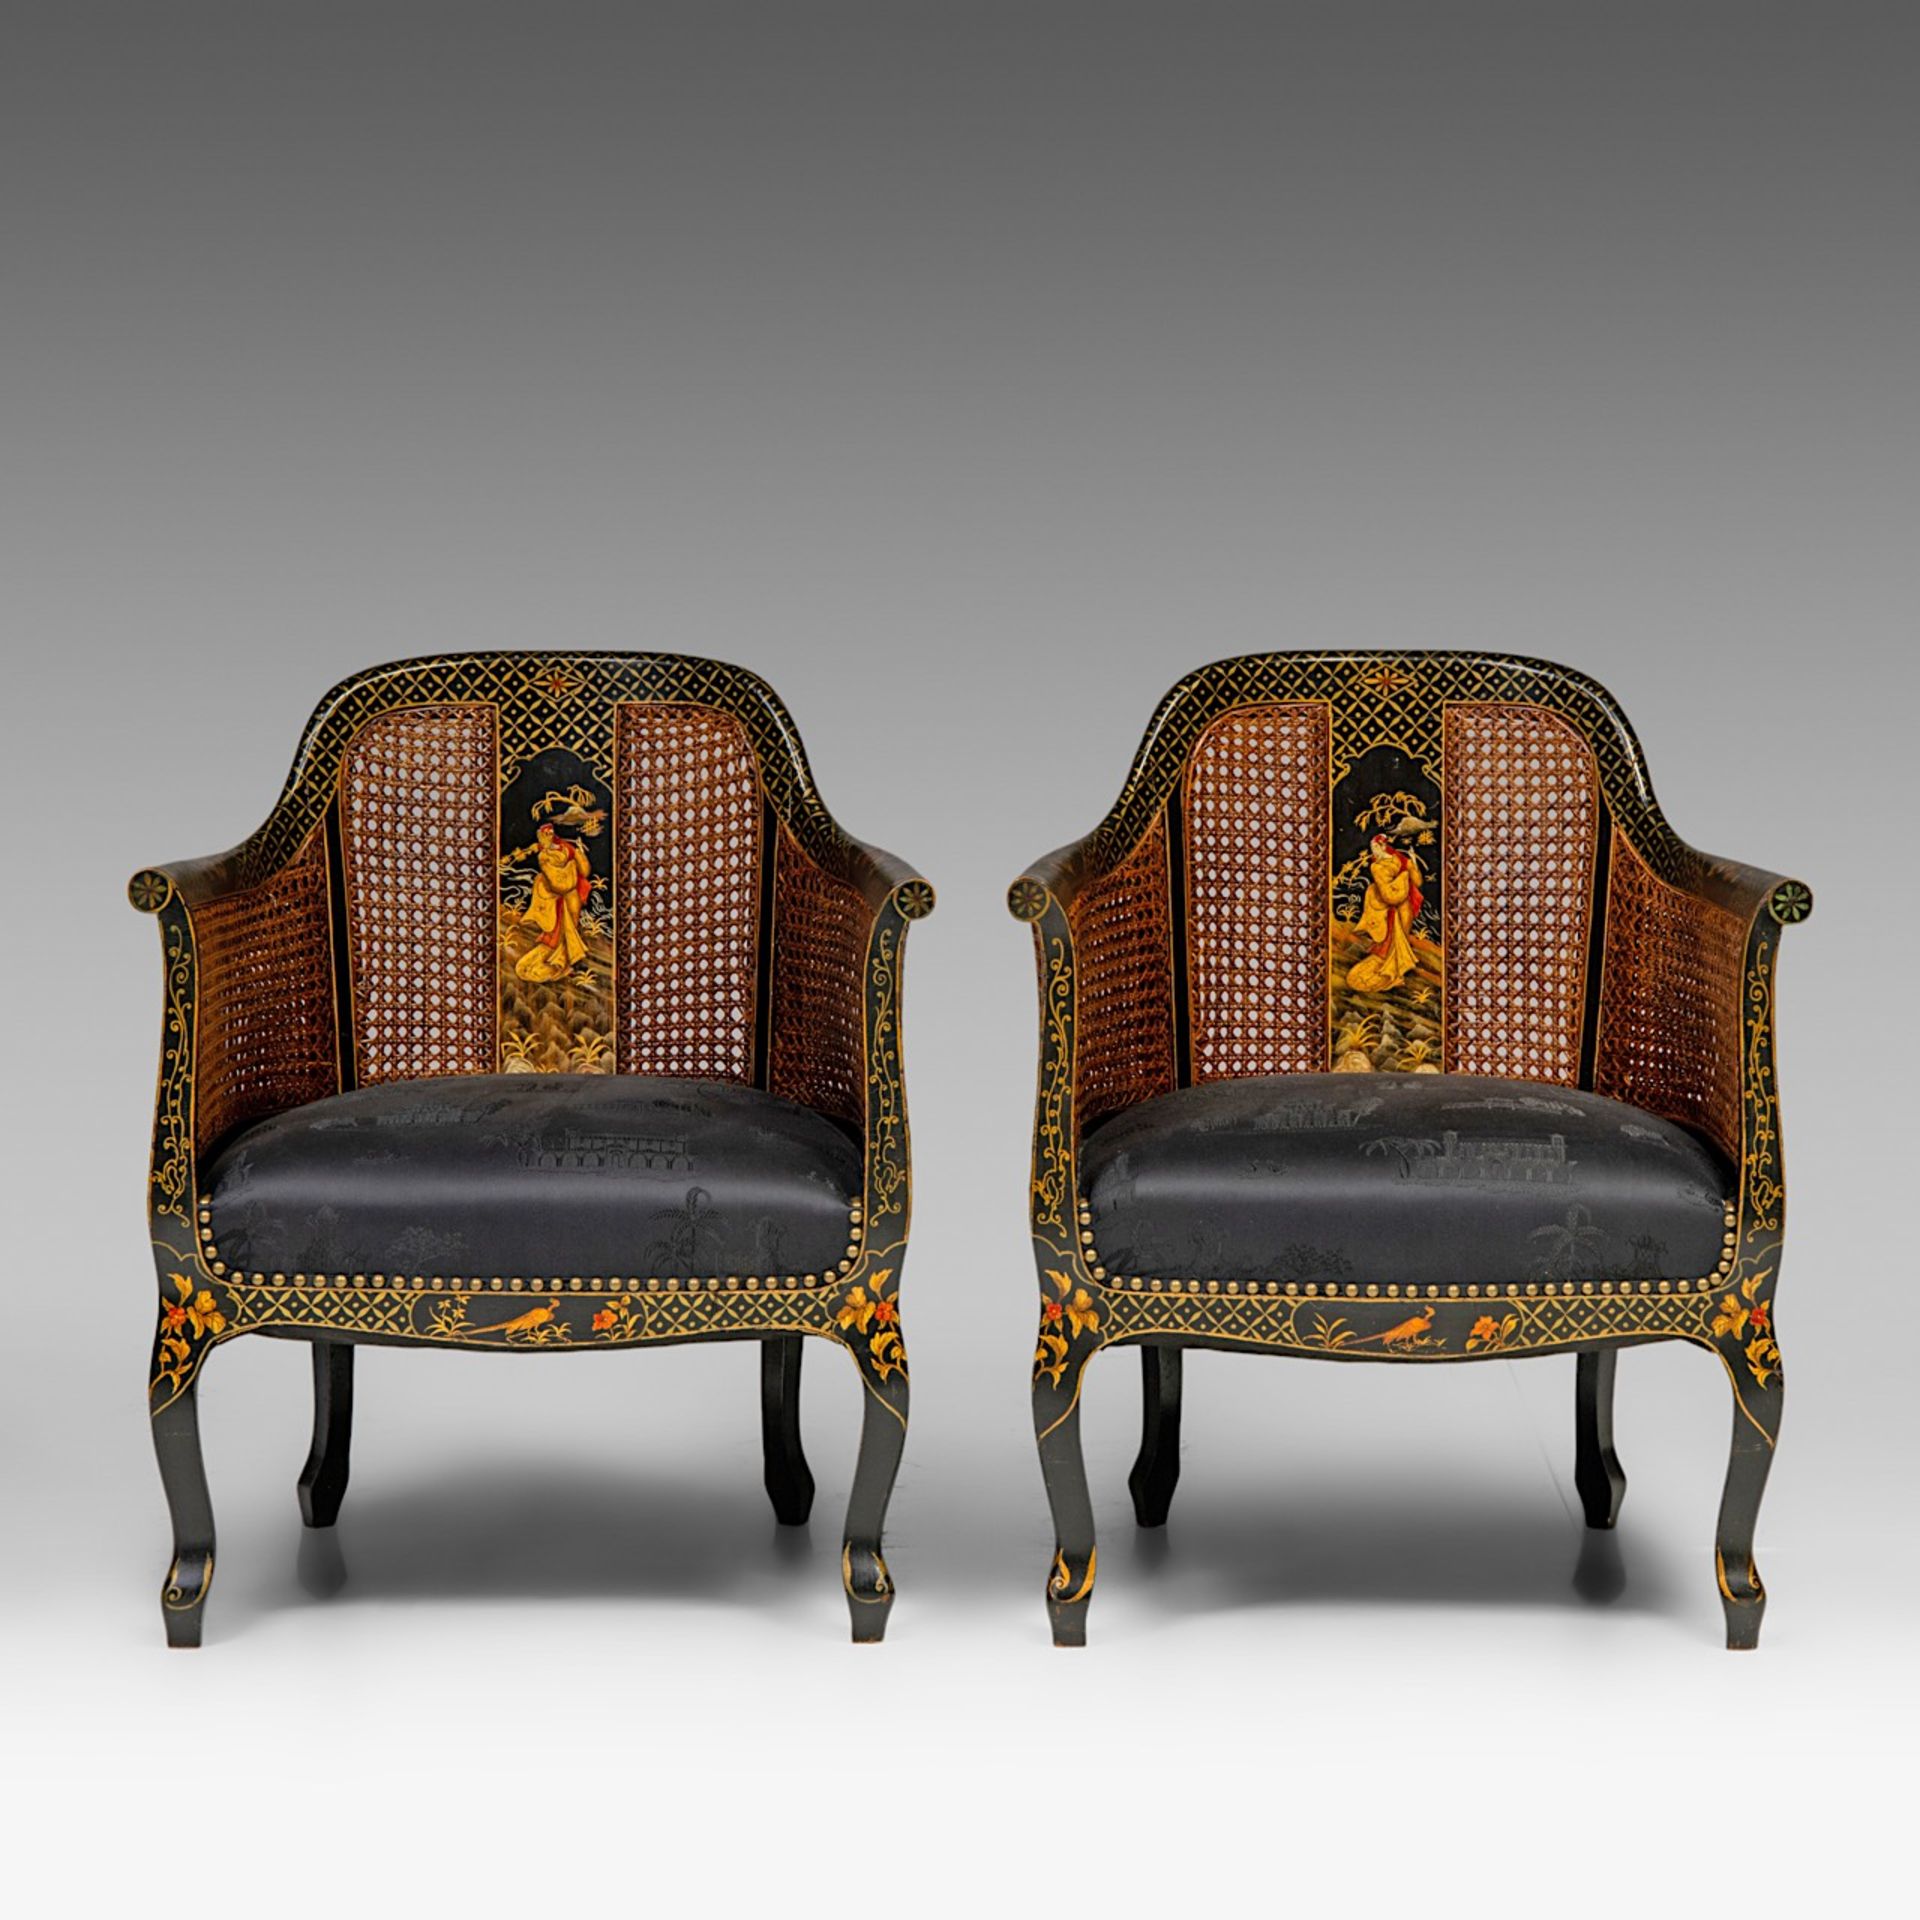 Two sets of handpainted Japonisme armchairs, with wicker panels, signed, H total 84 cm - H seat 36 c - Bild 7 aus 12